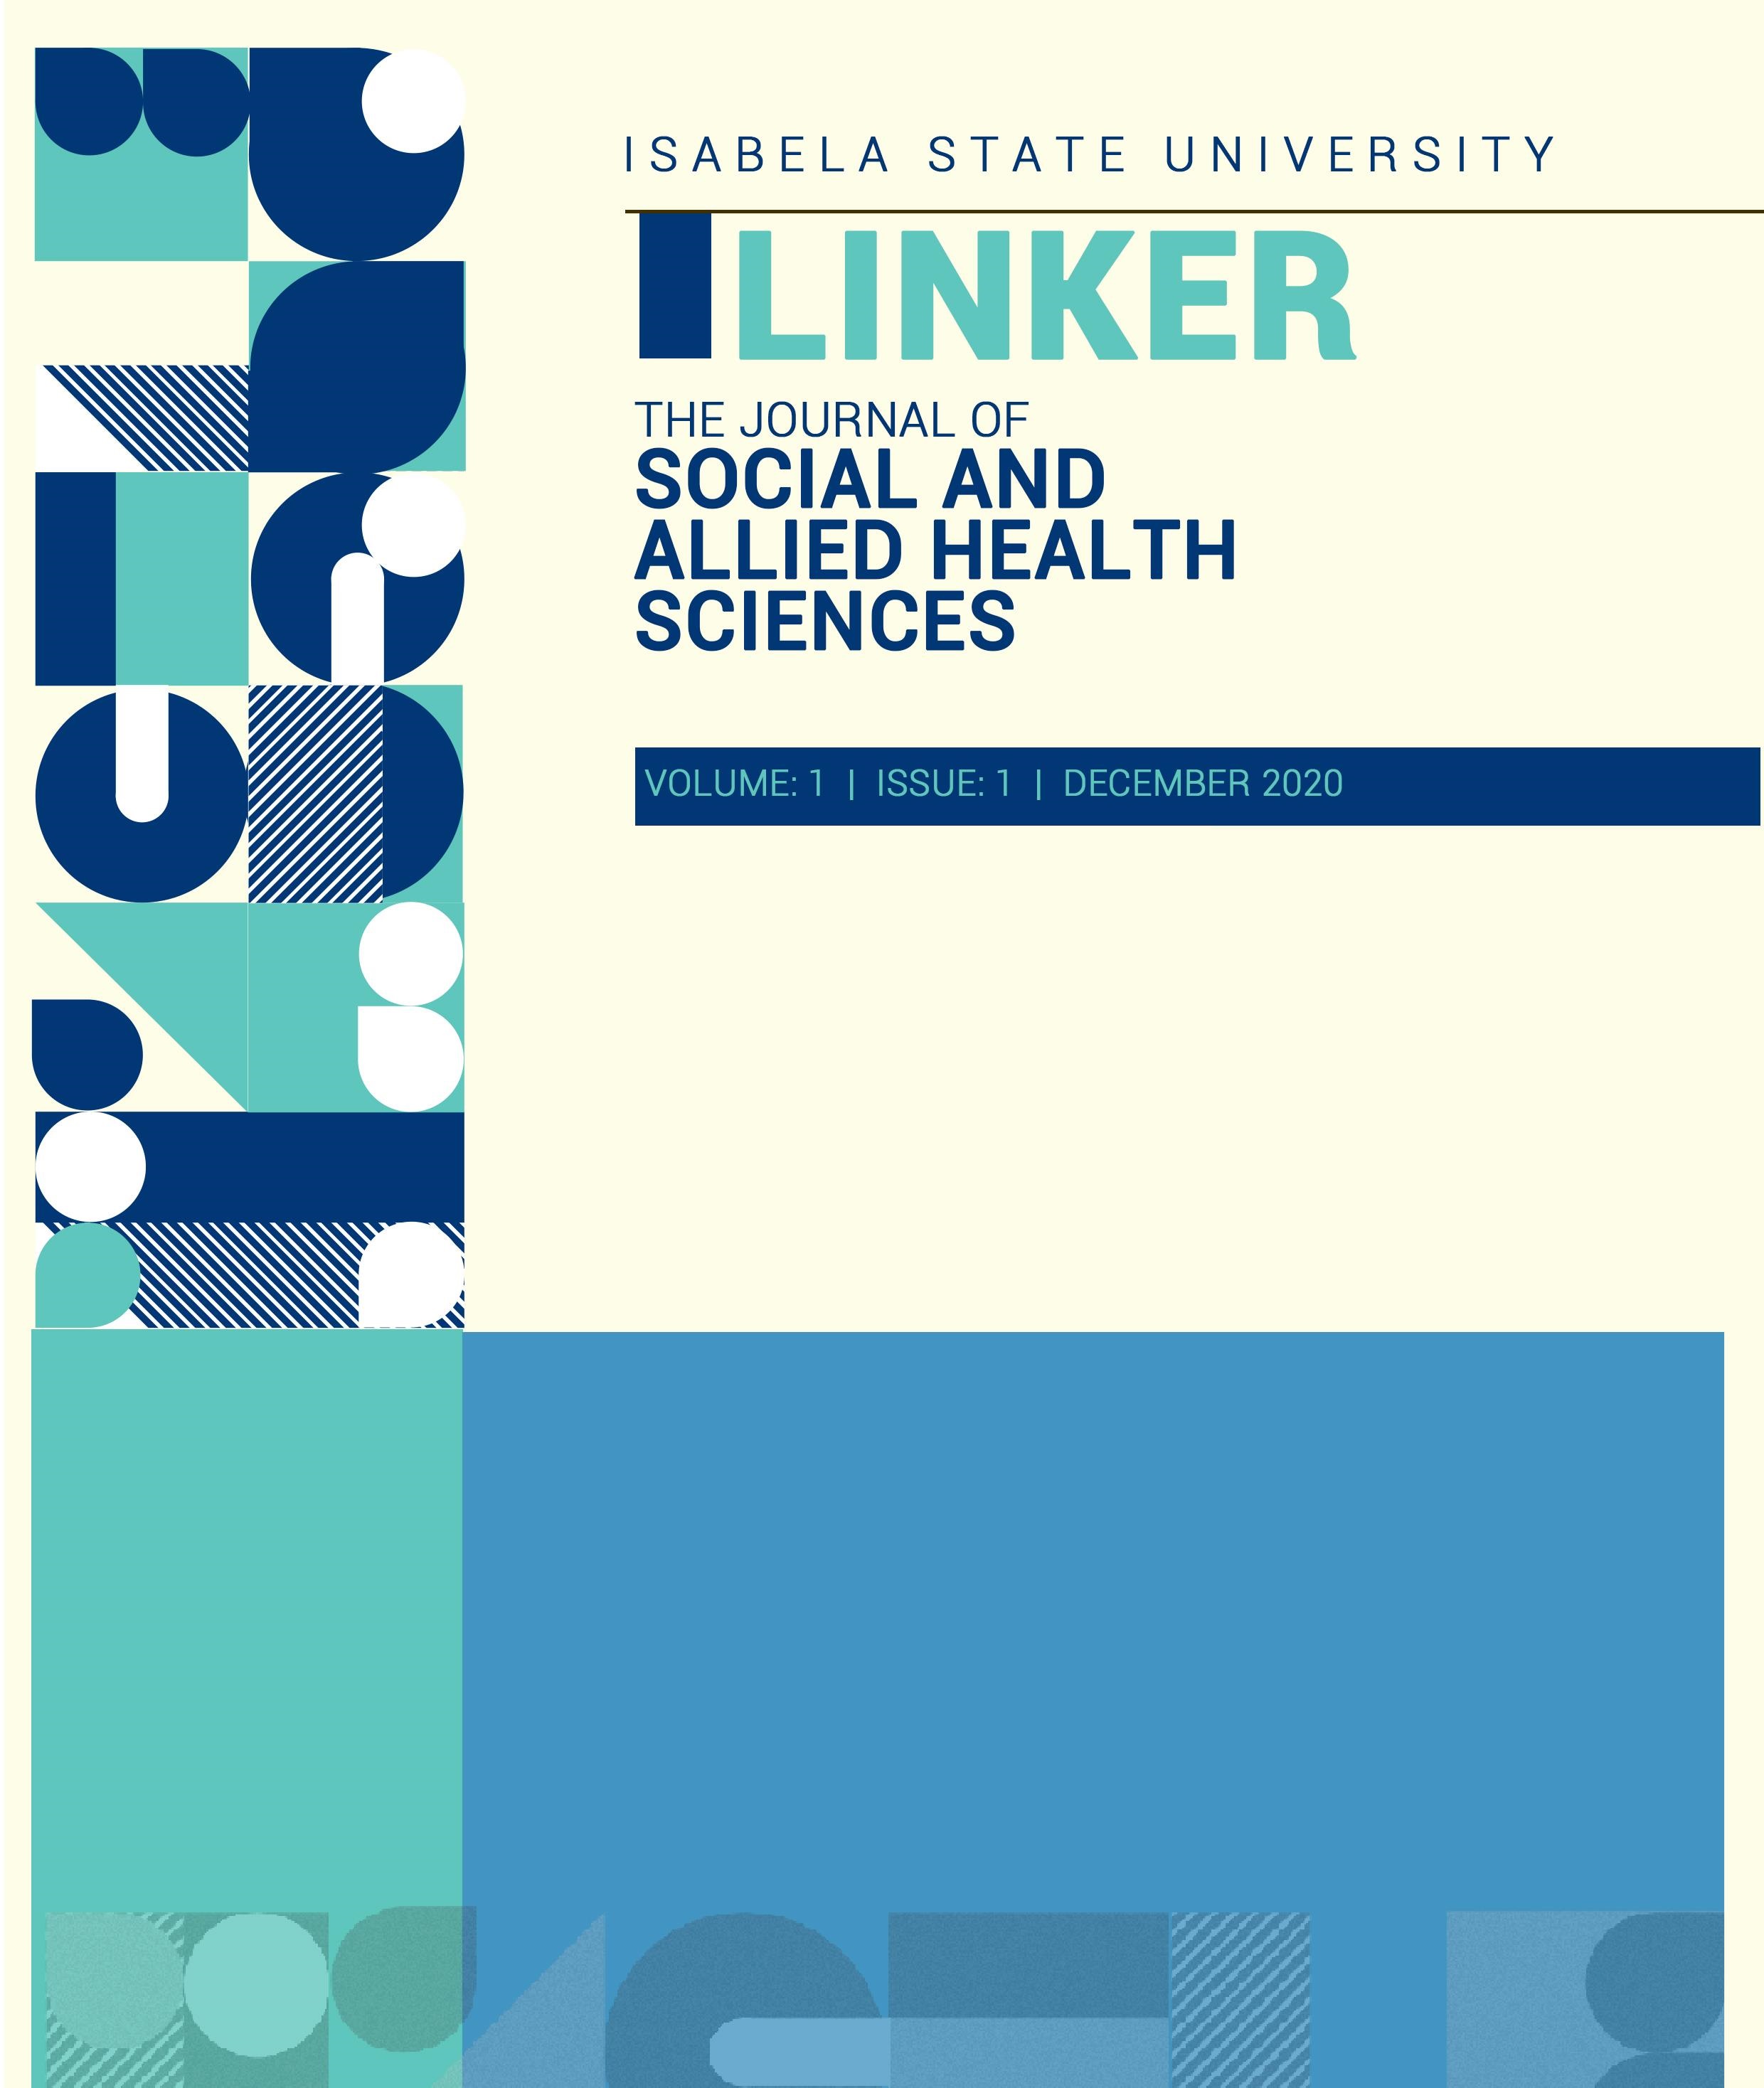 					View Vol. 1 No. 1 (2020): The Journal of Social and Allied Health Sciences
				